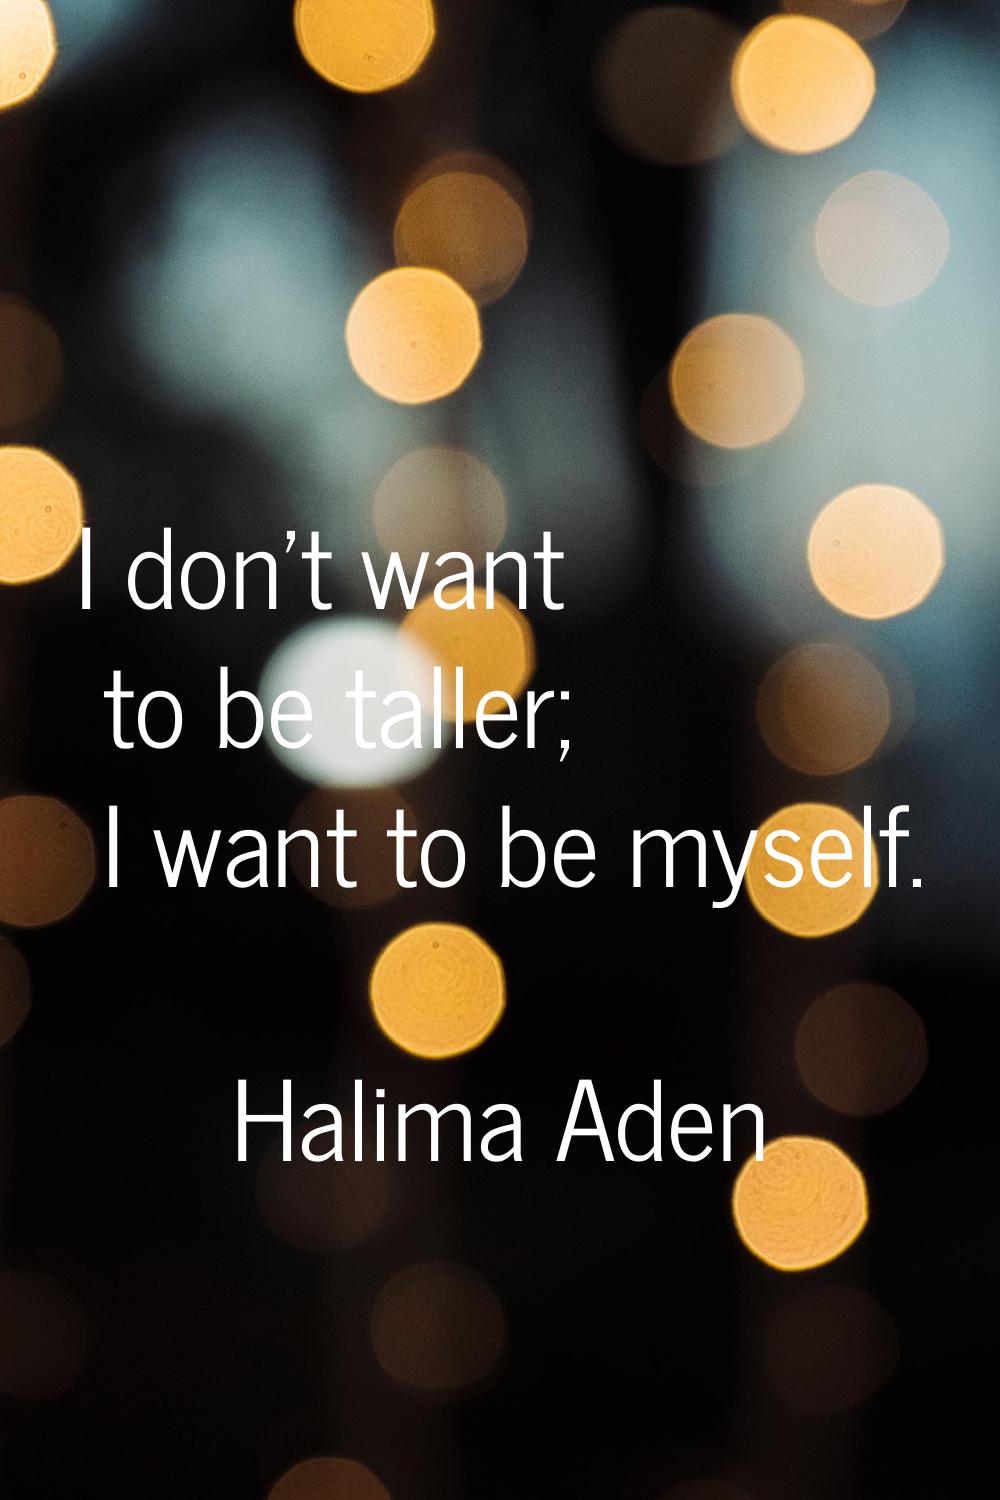 I don't want to be taller; I want to be myself.